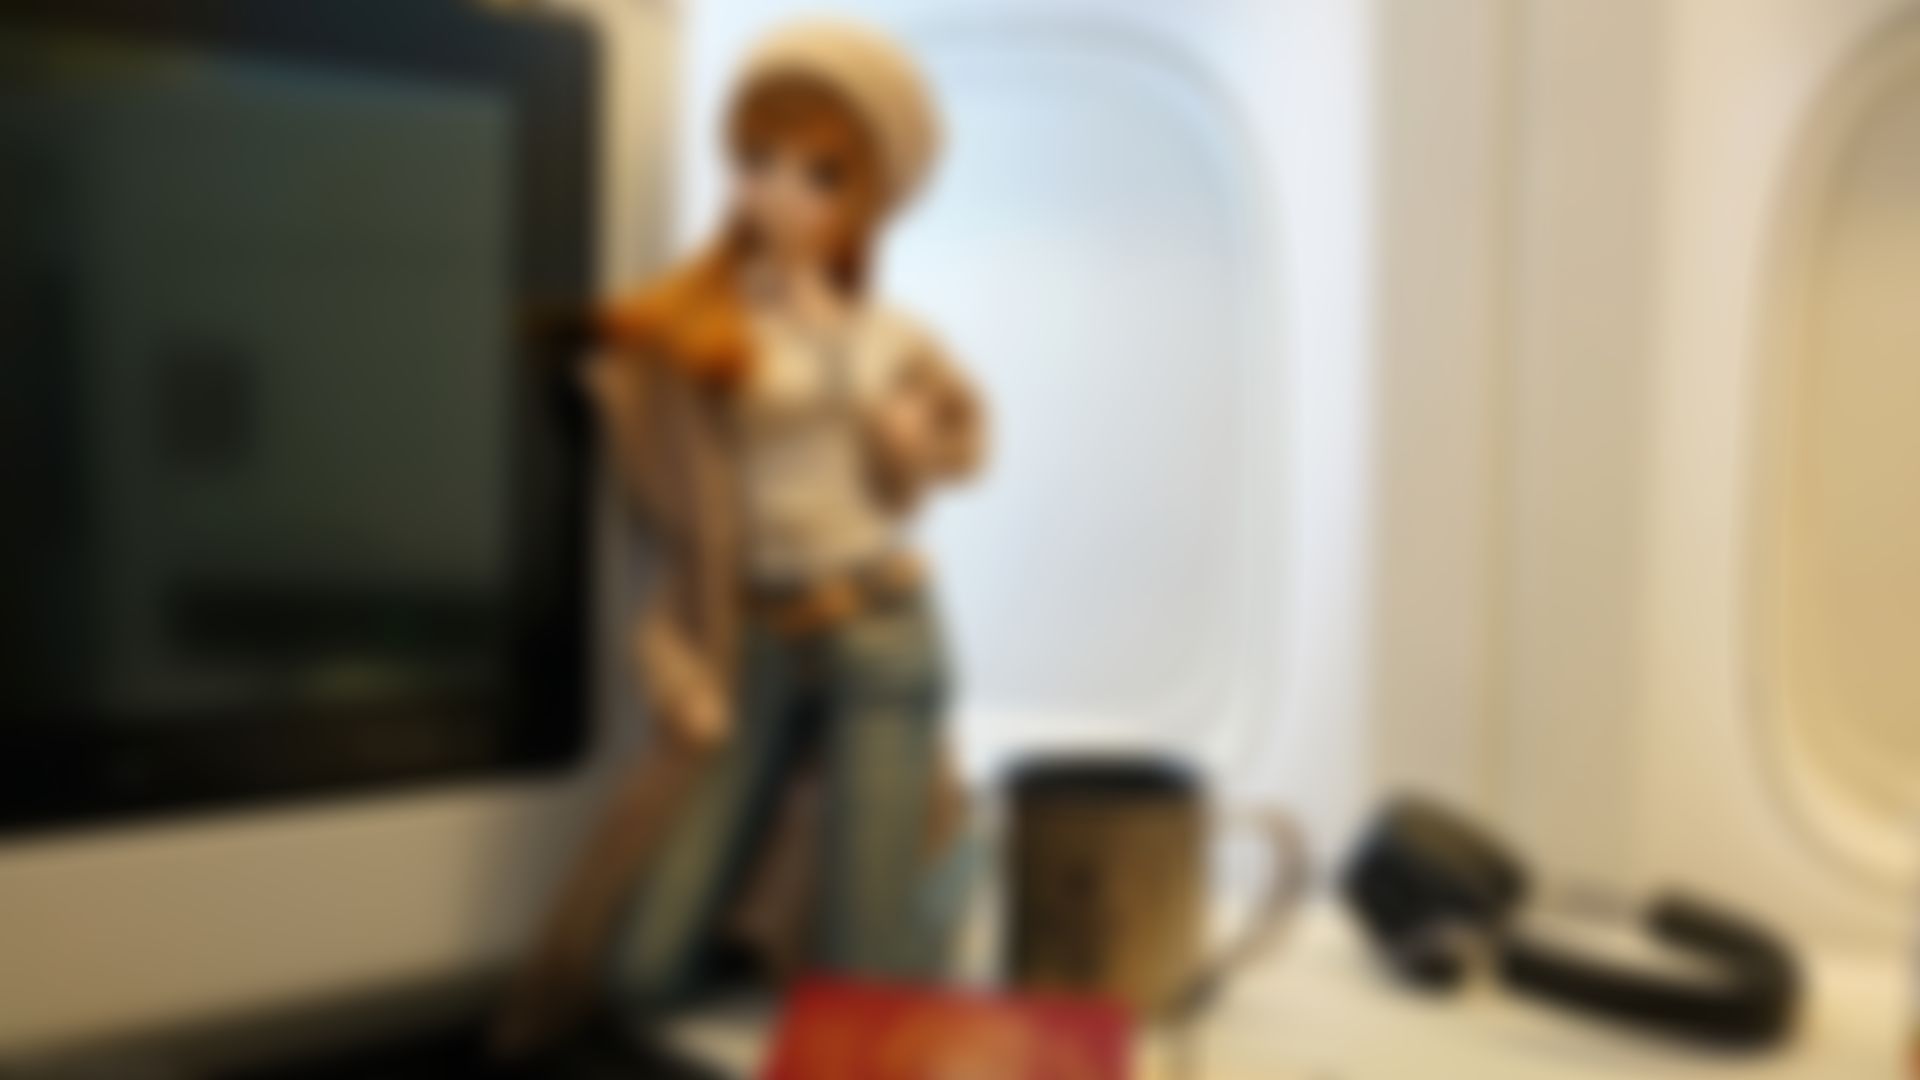 Smart Doll makes a great travel companion and conversation piece - meet new friends and even business partners along the way